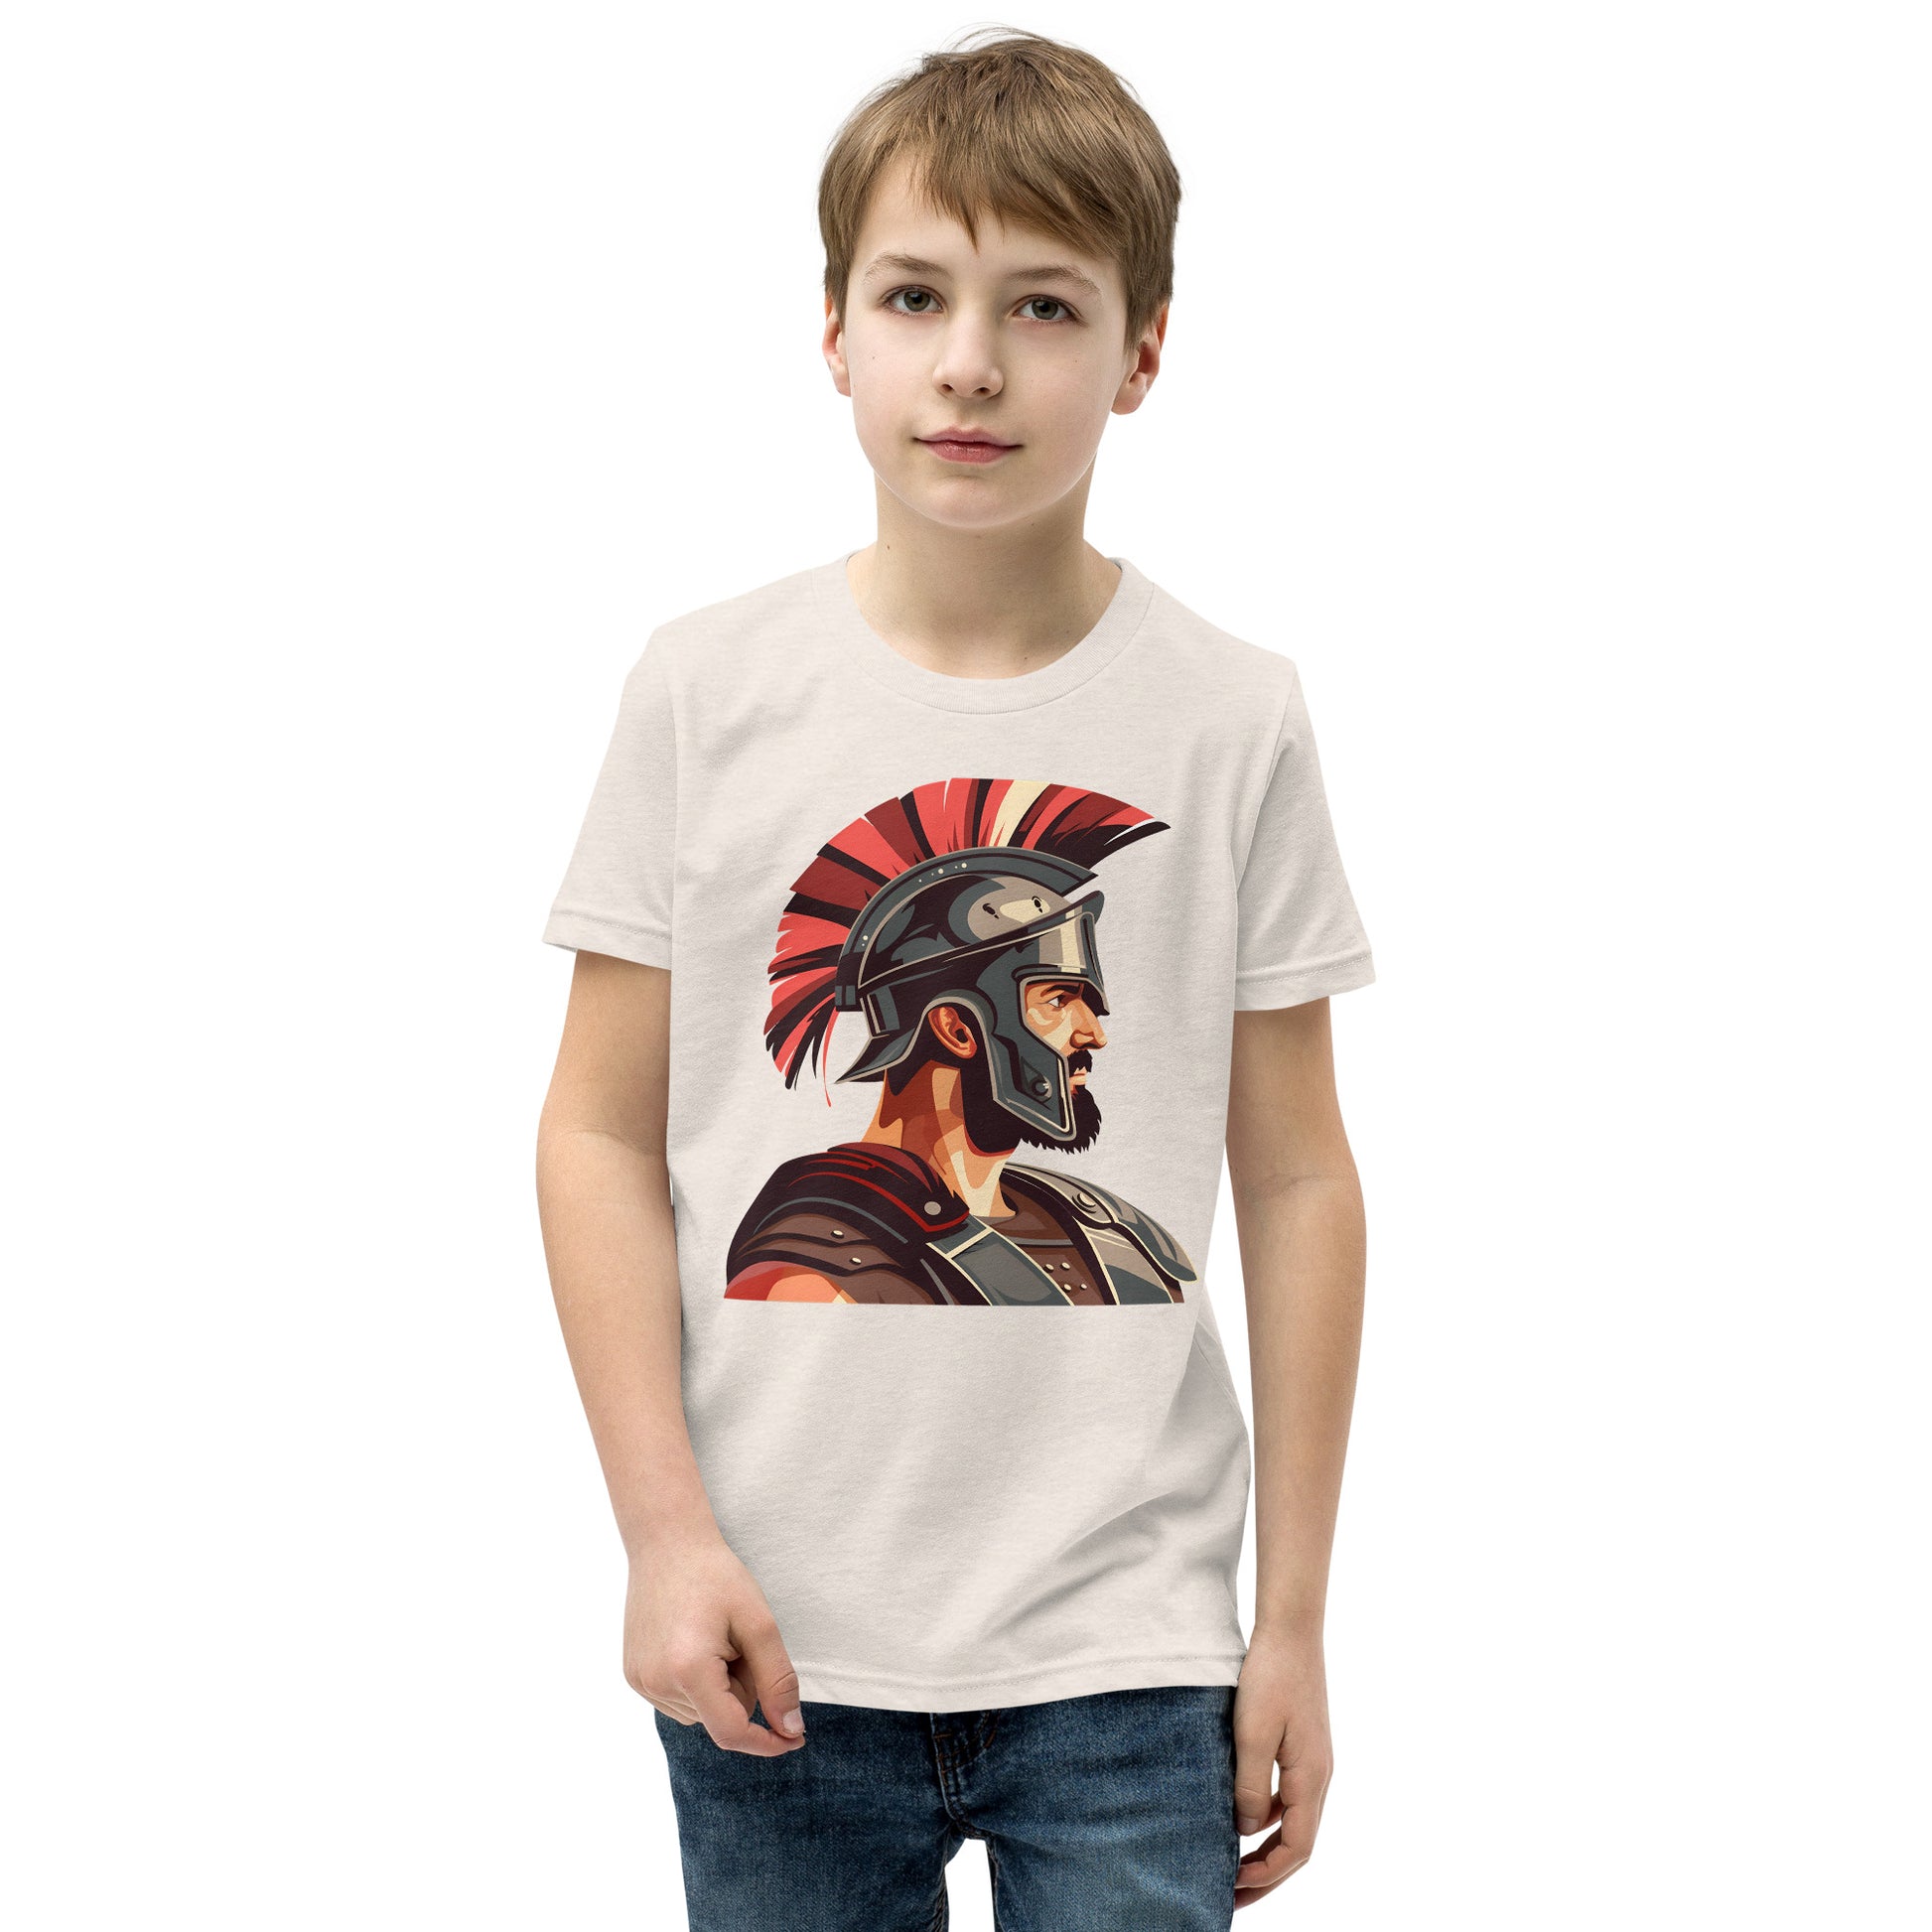 Teenager with a Heather dust T-shirt with a print of a warrior